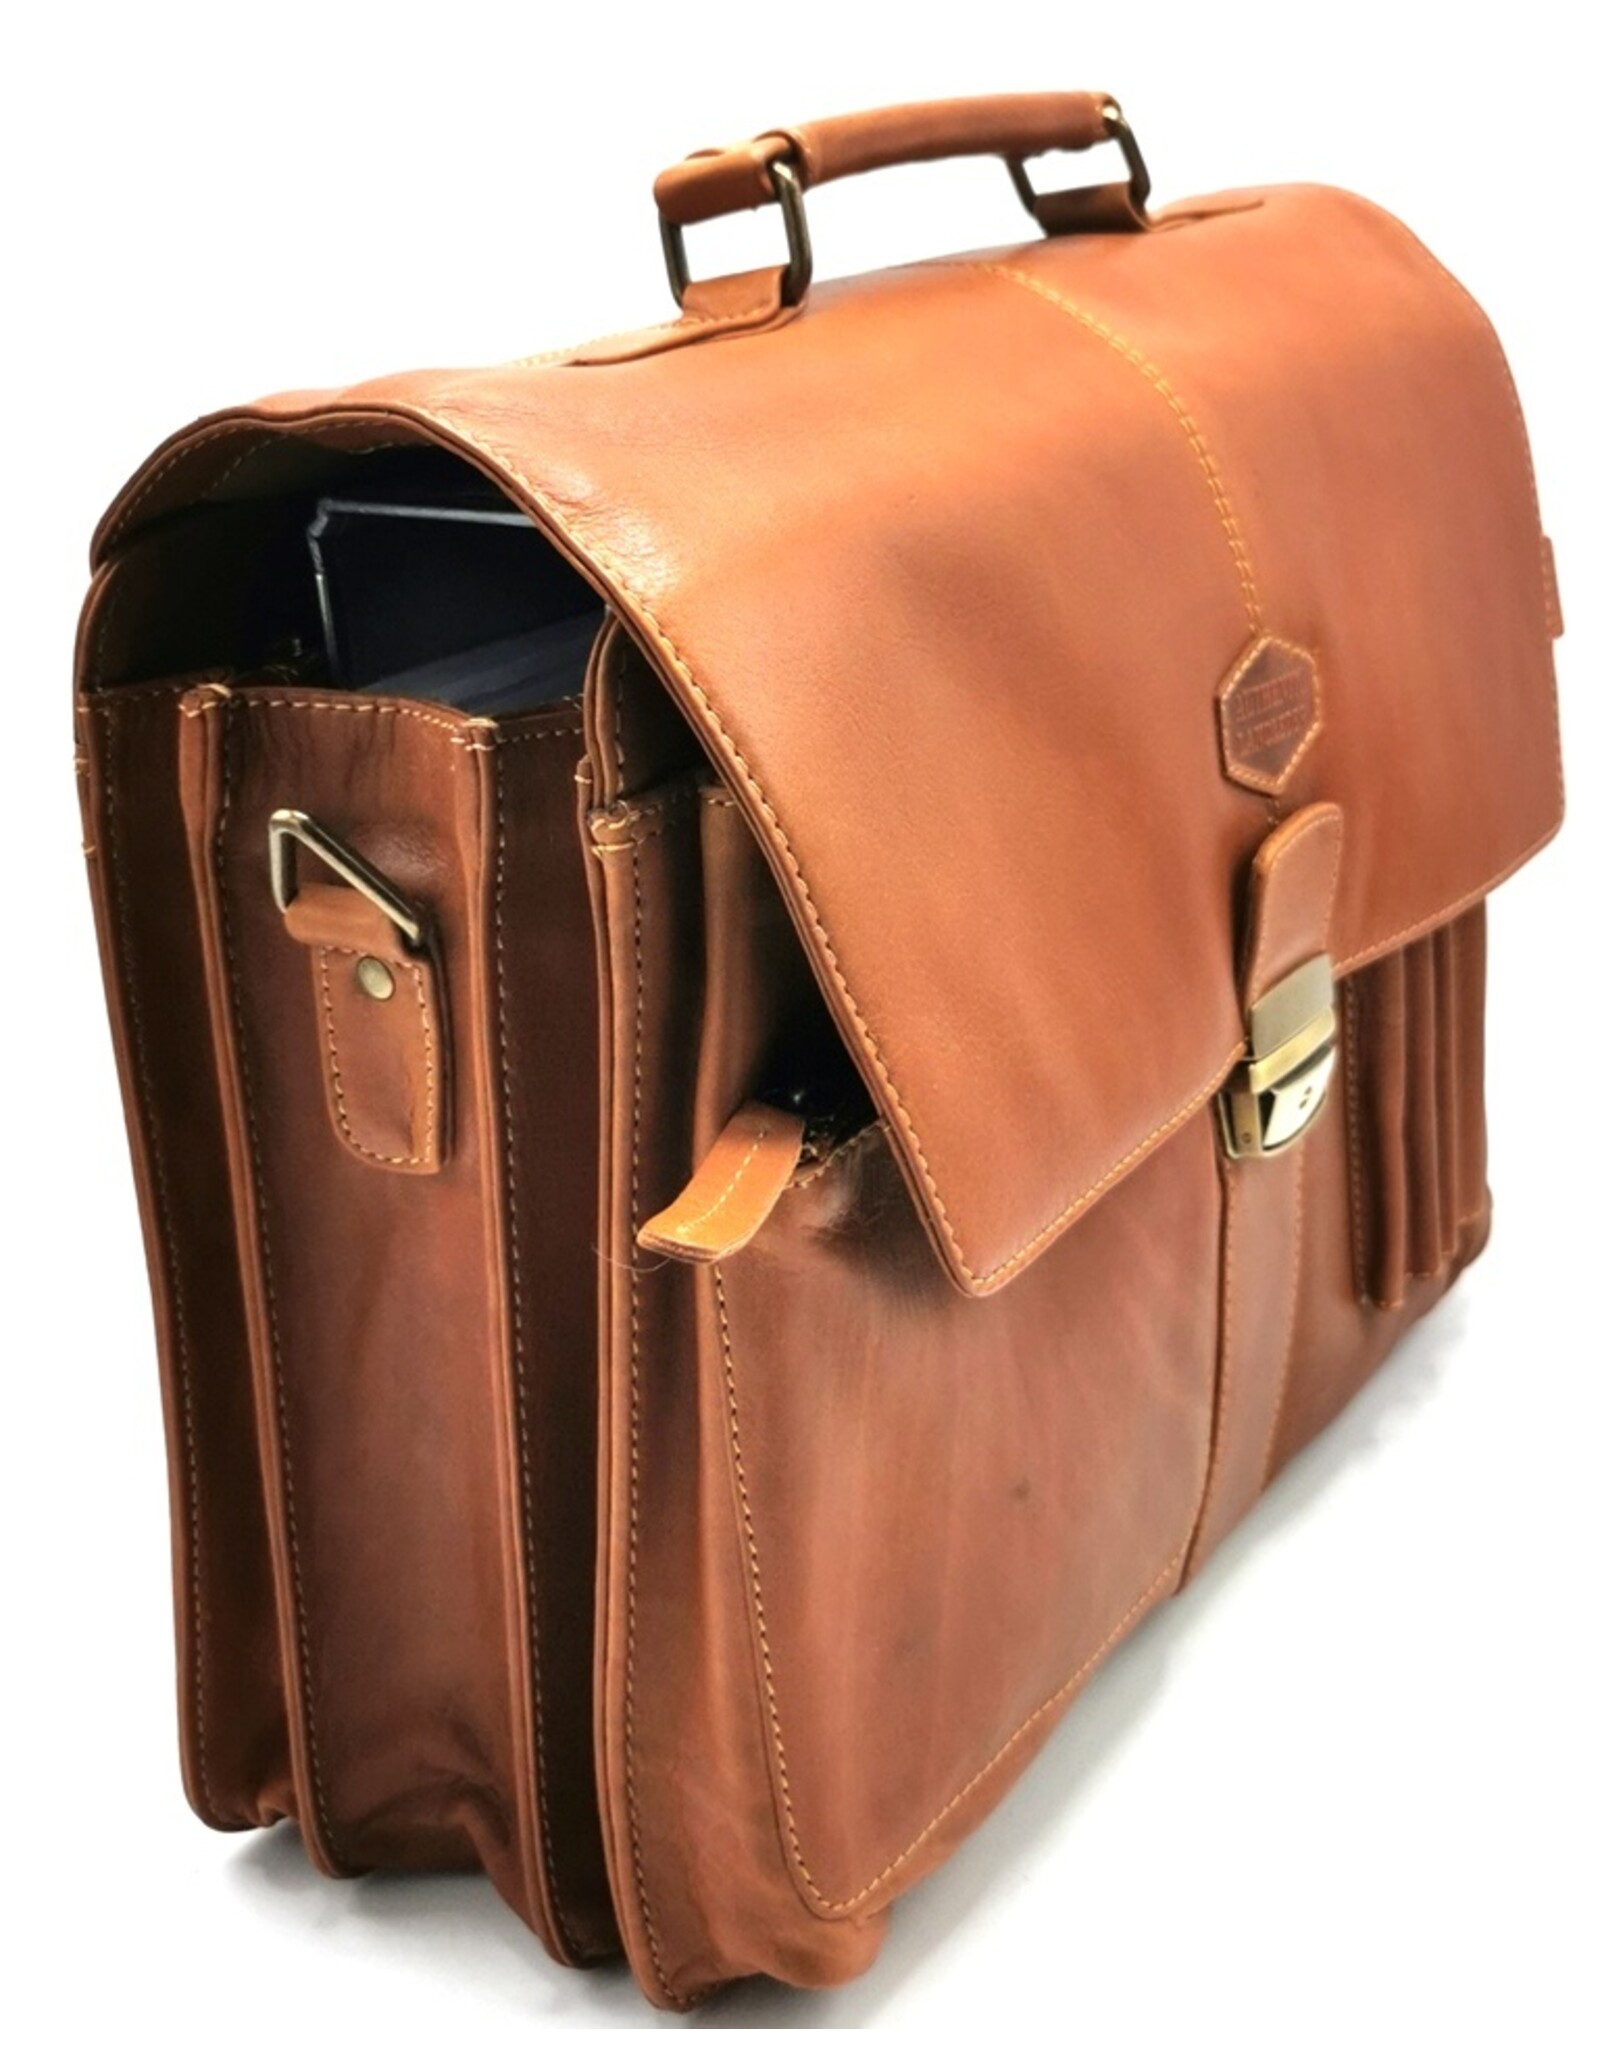 LandLeder Leather bags and Leather laptop bags - Leather Briefcase PINCH OF WAX 40cm